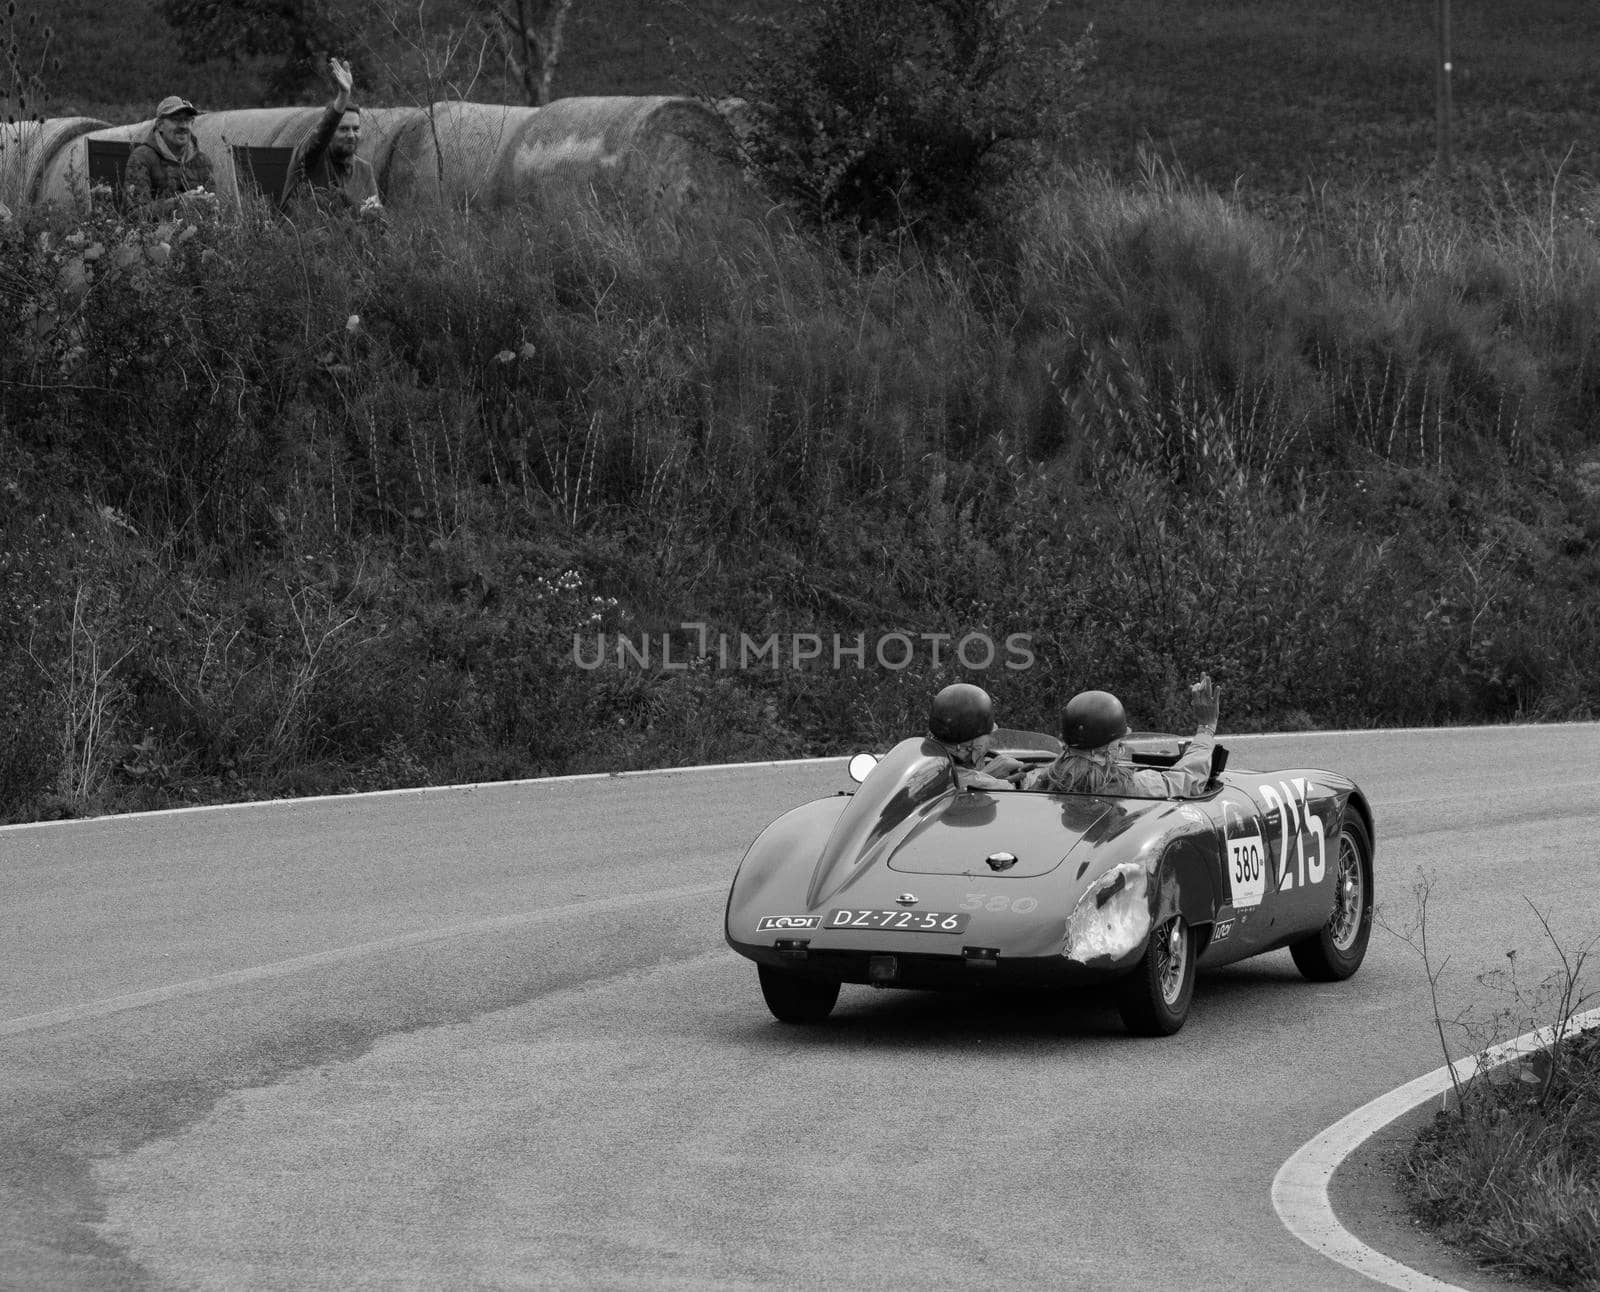 OSCA S187/750 1956 on an old racing car in rally Mille Miglia 2020 the famous italian historical race (1927-1957 by massimocampanari